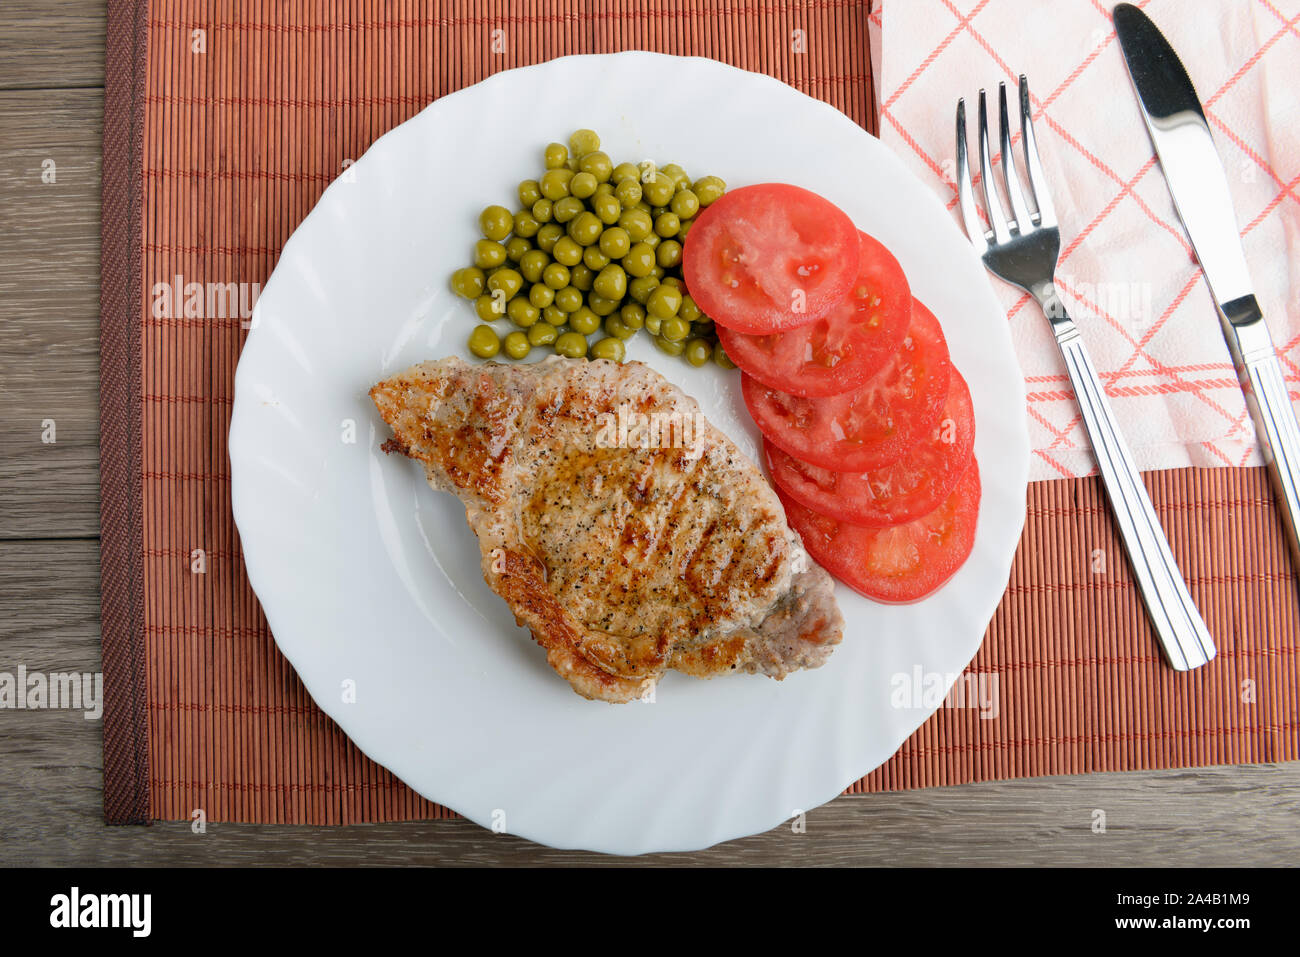 Grilled pork chop steak meat with green pea and tomatoes. Top view Stock Photo